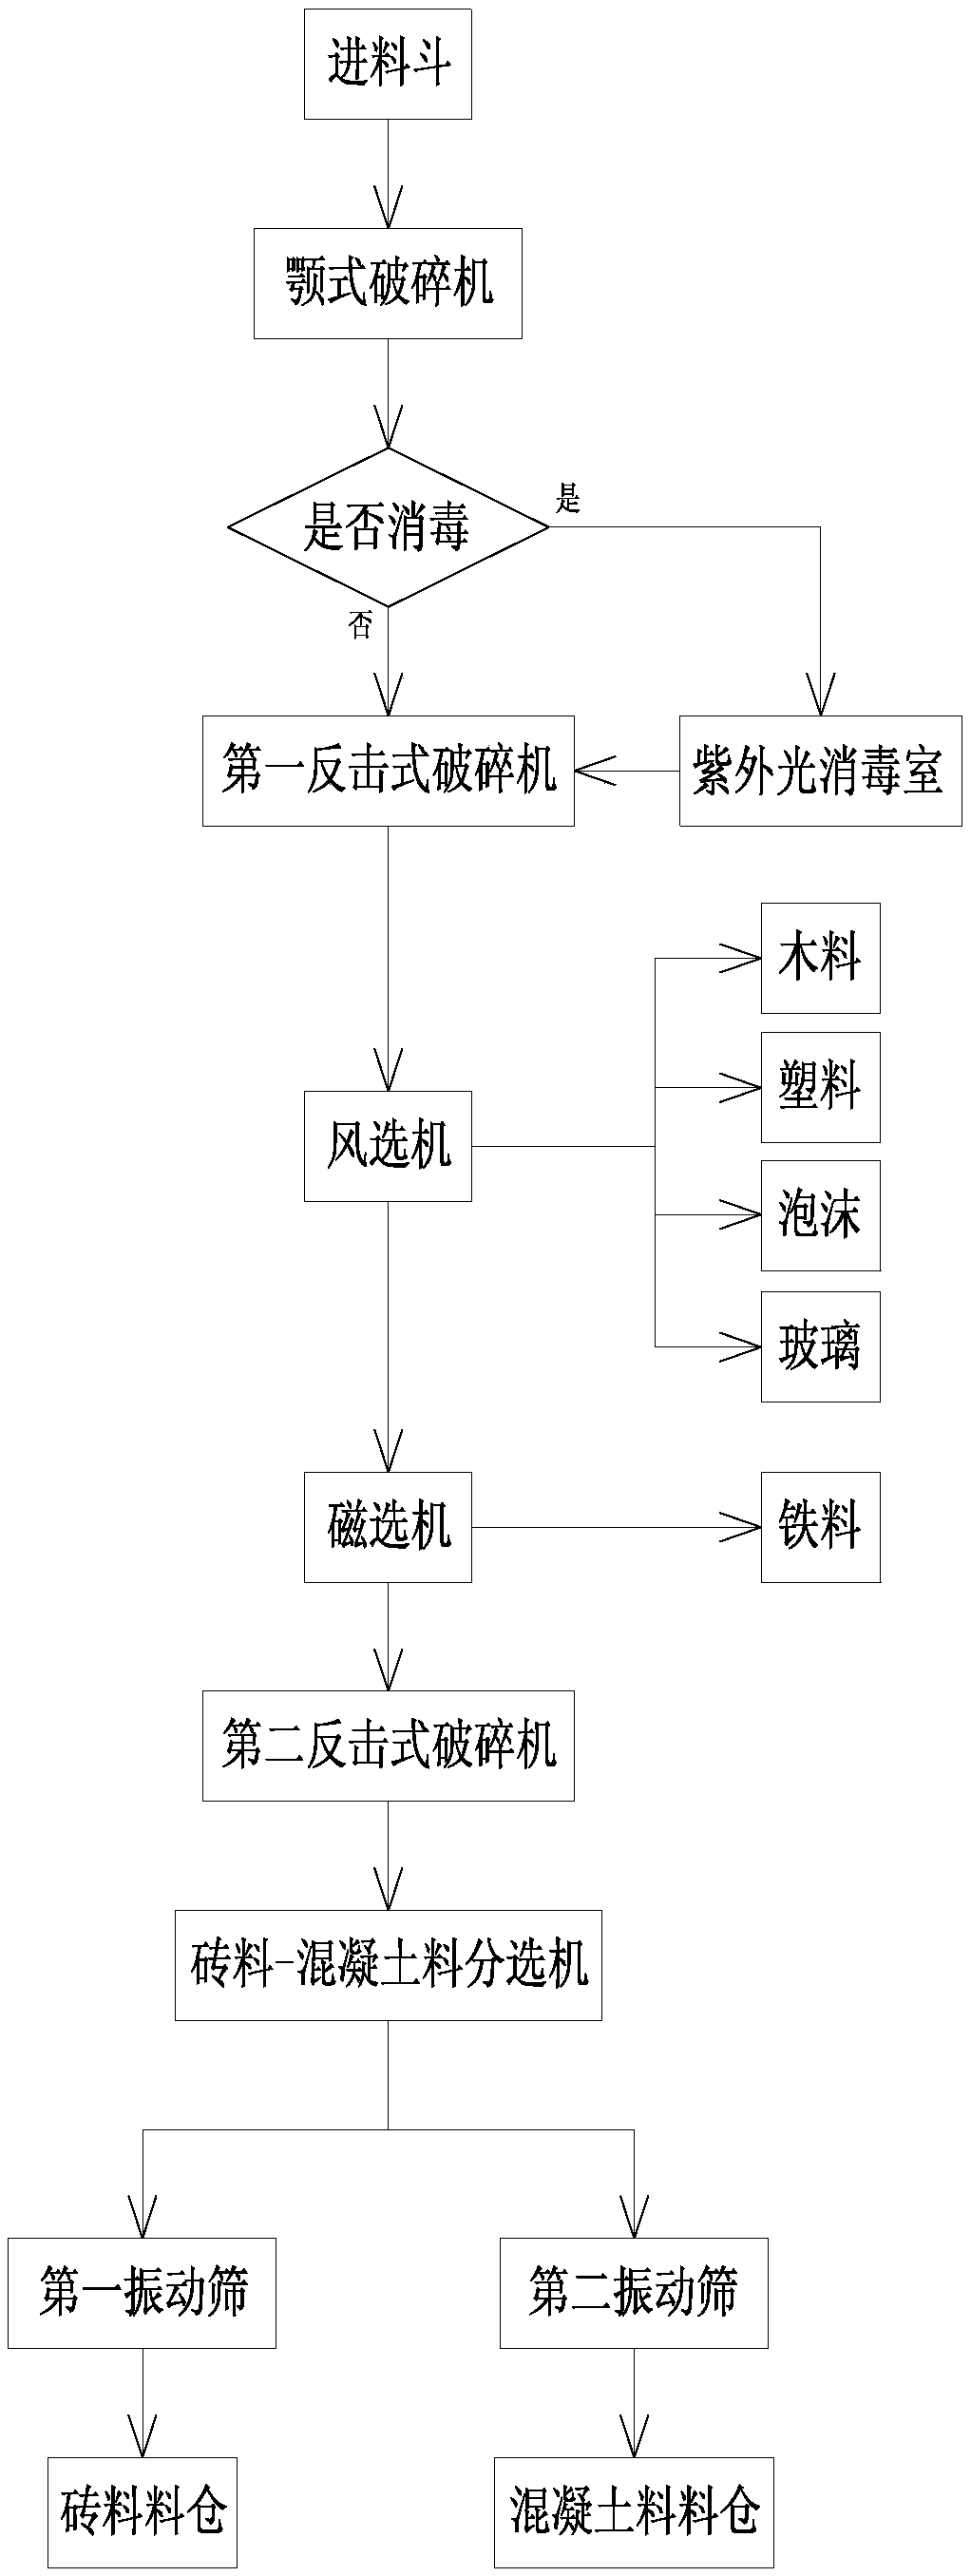 Construction waste separation and treatment system